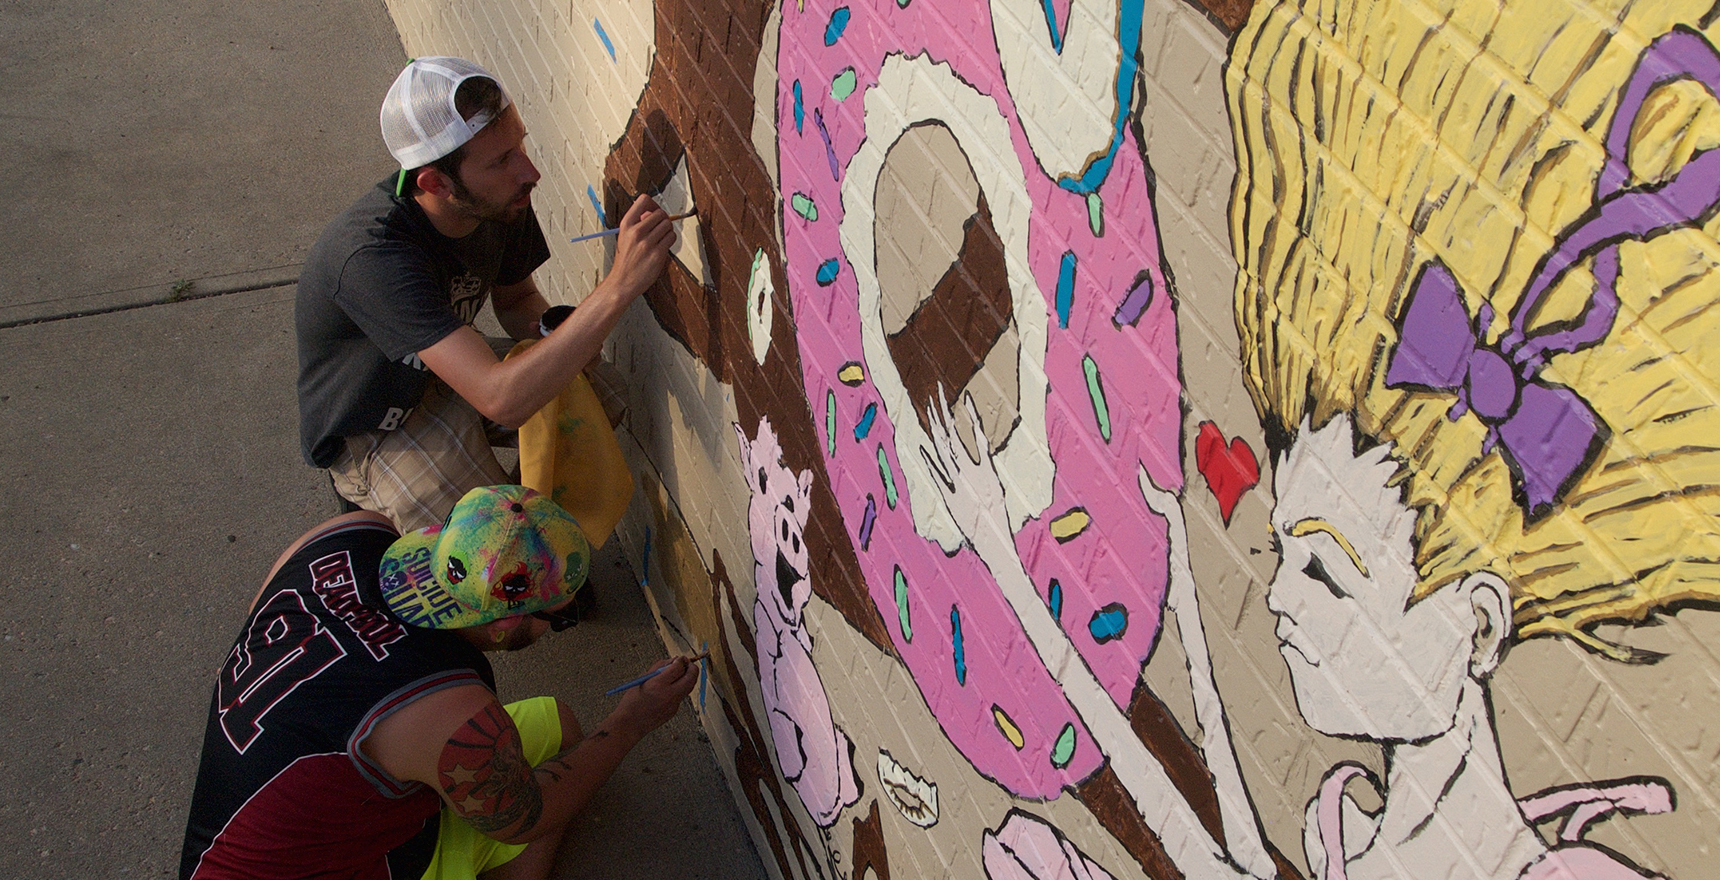 Aaron Van Dyke painting a mural featuring a girl holding a giant doughnut